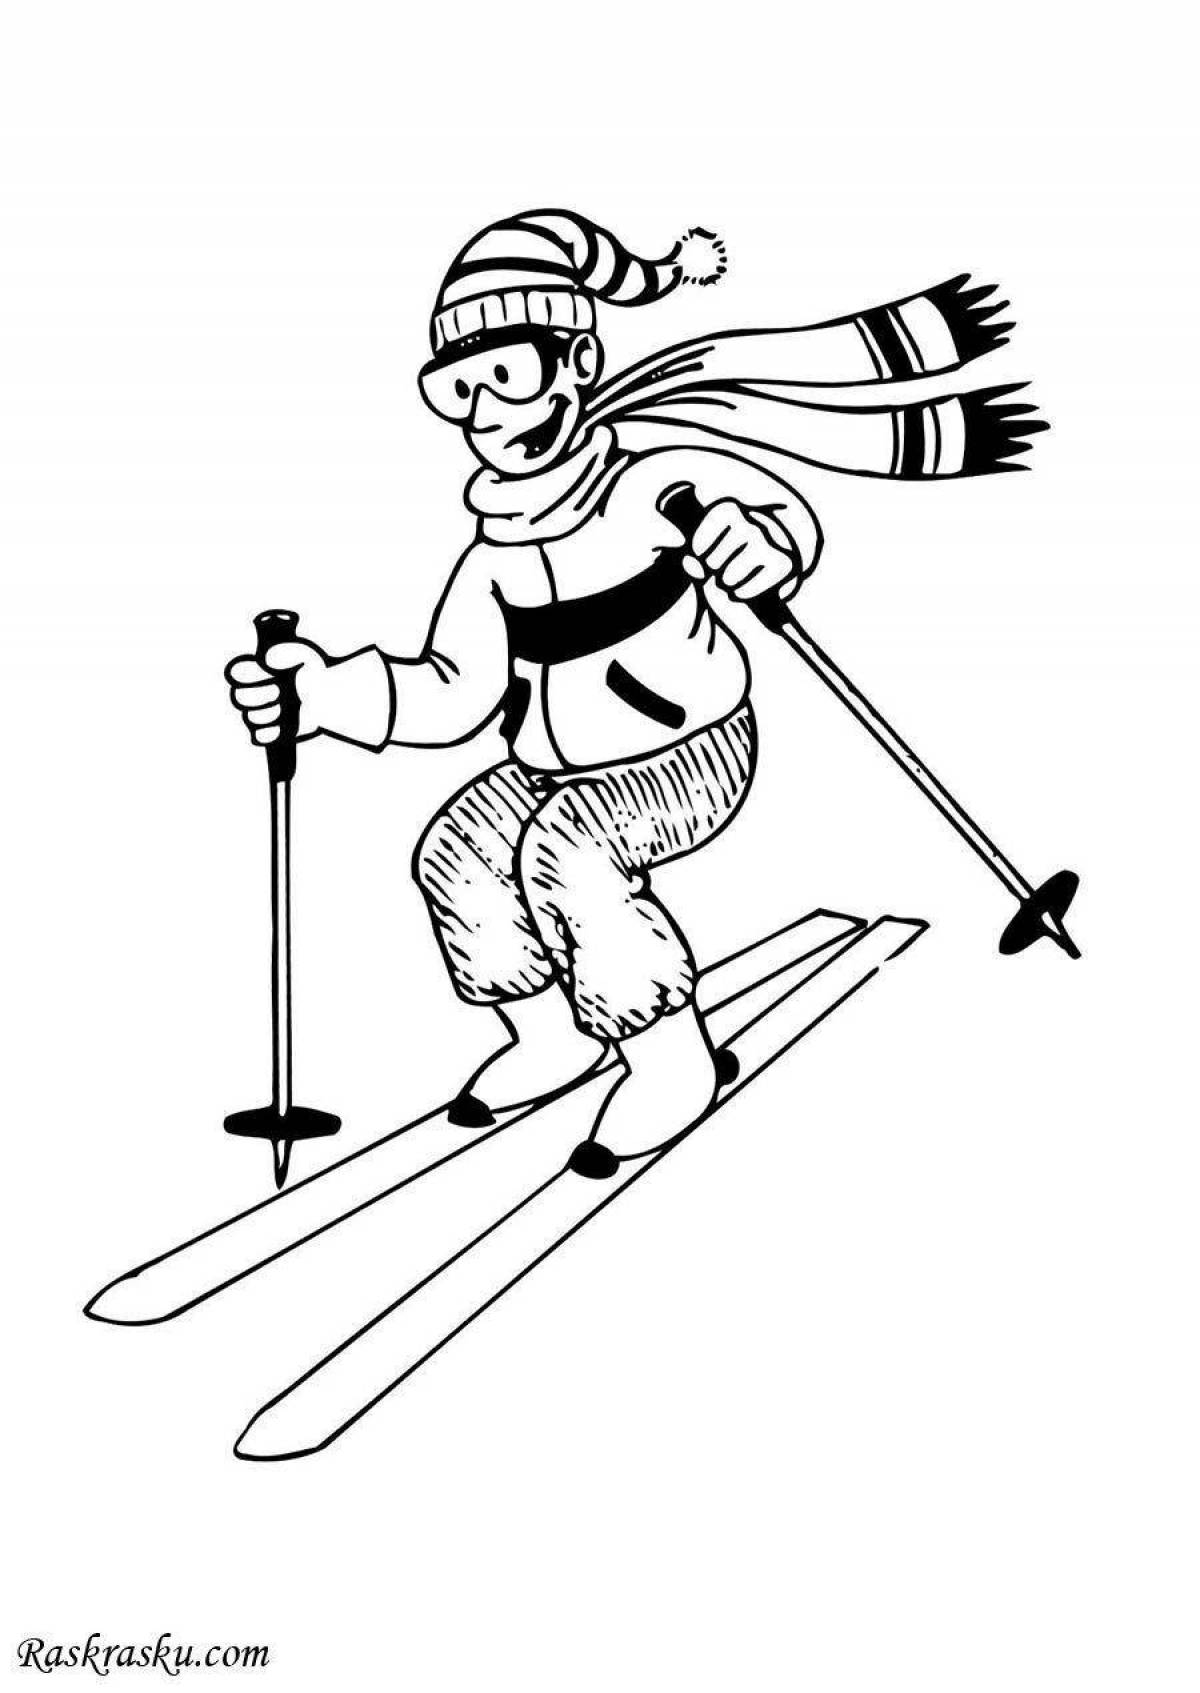 Adventure skier coloring book for kids